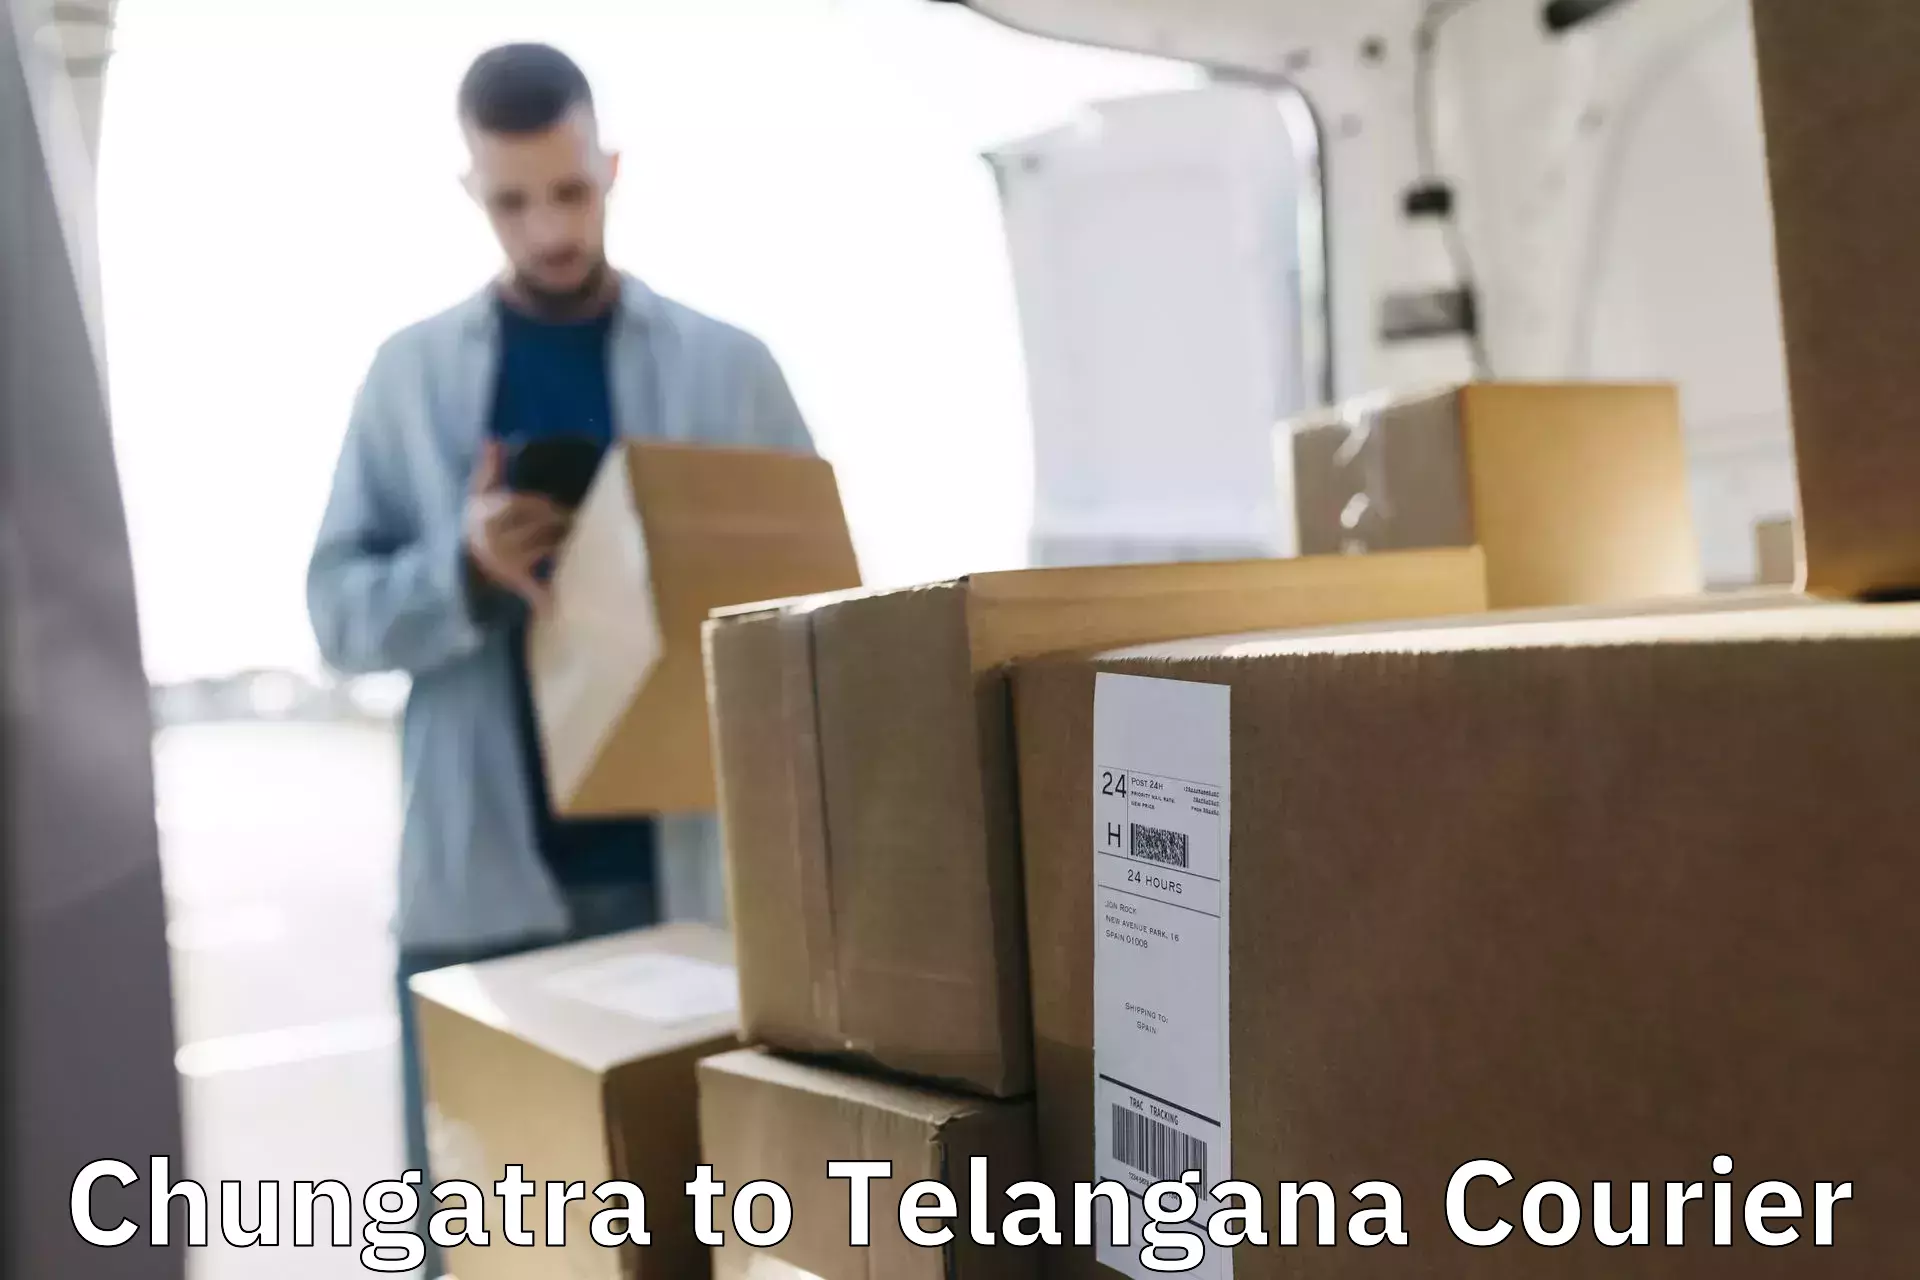 24-hour courier service in Chungatra to Kothagudem